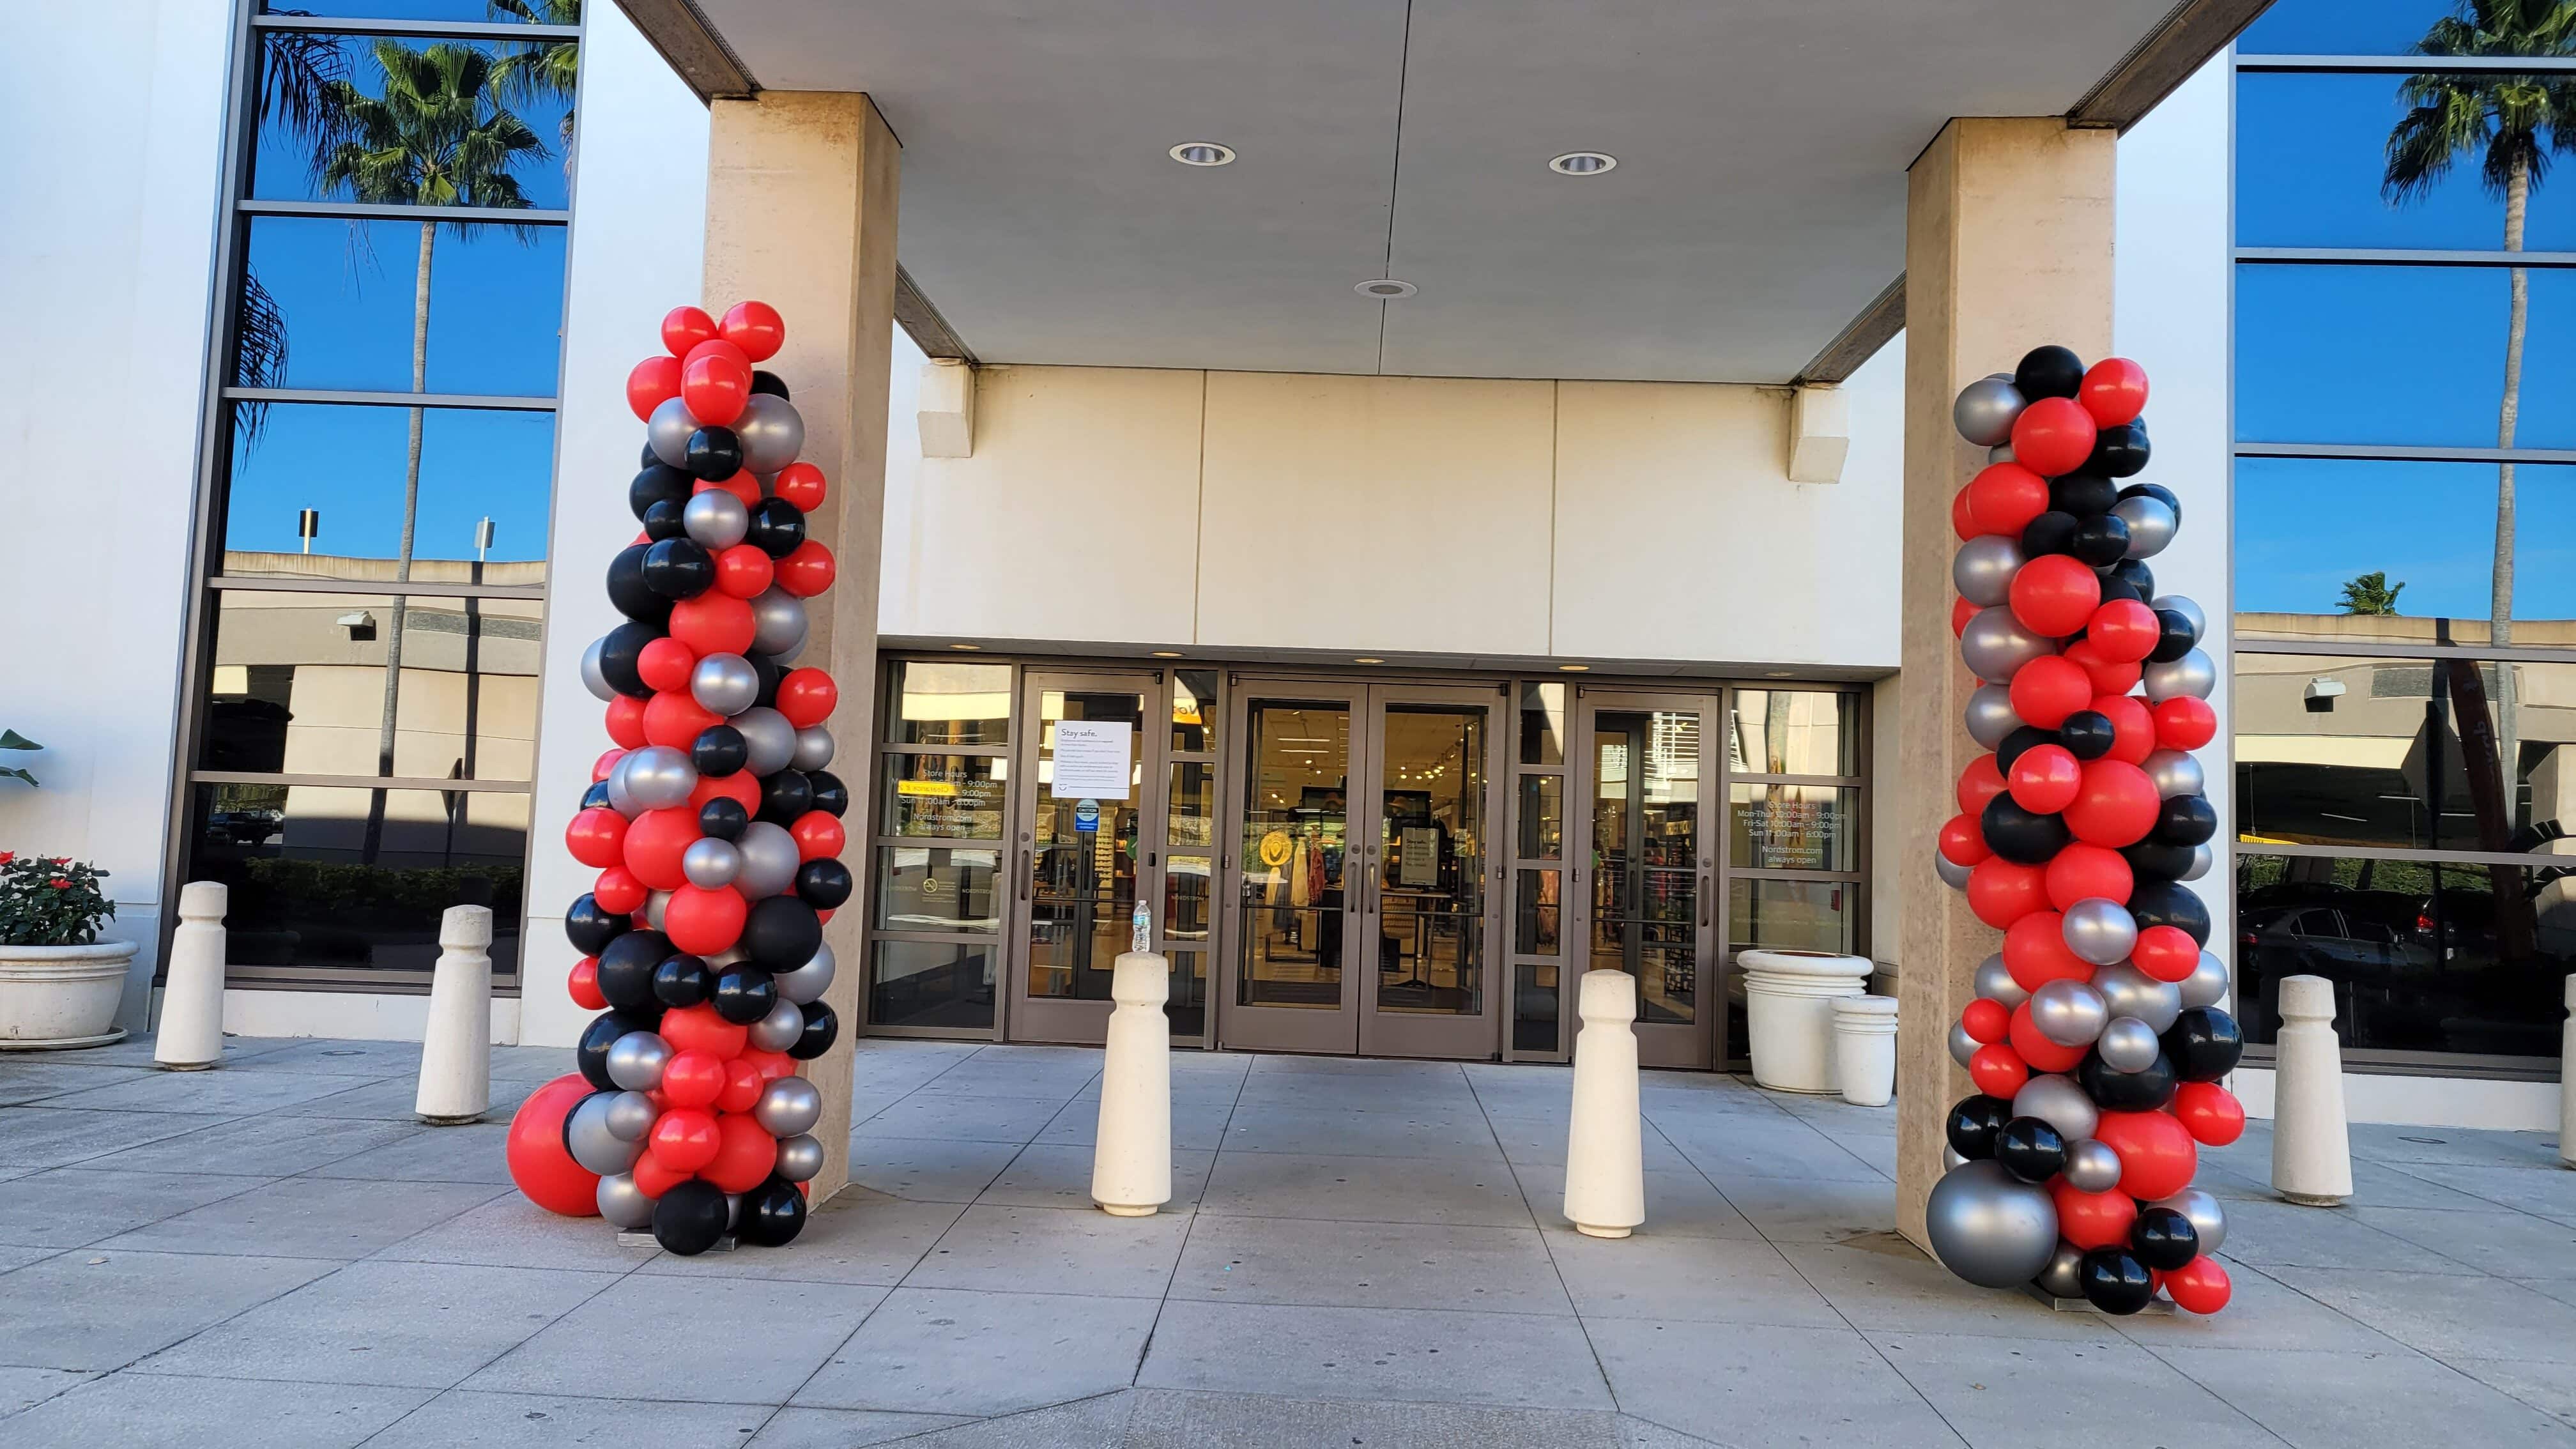 Balloon Columns organic at Nordstroms entrance International mall decorations red black silver go bucs superbowl 2021 scaled